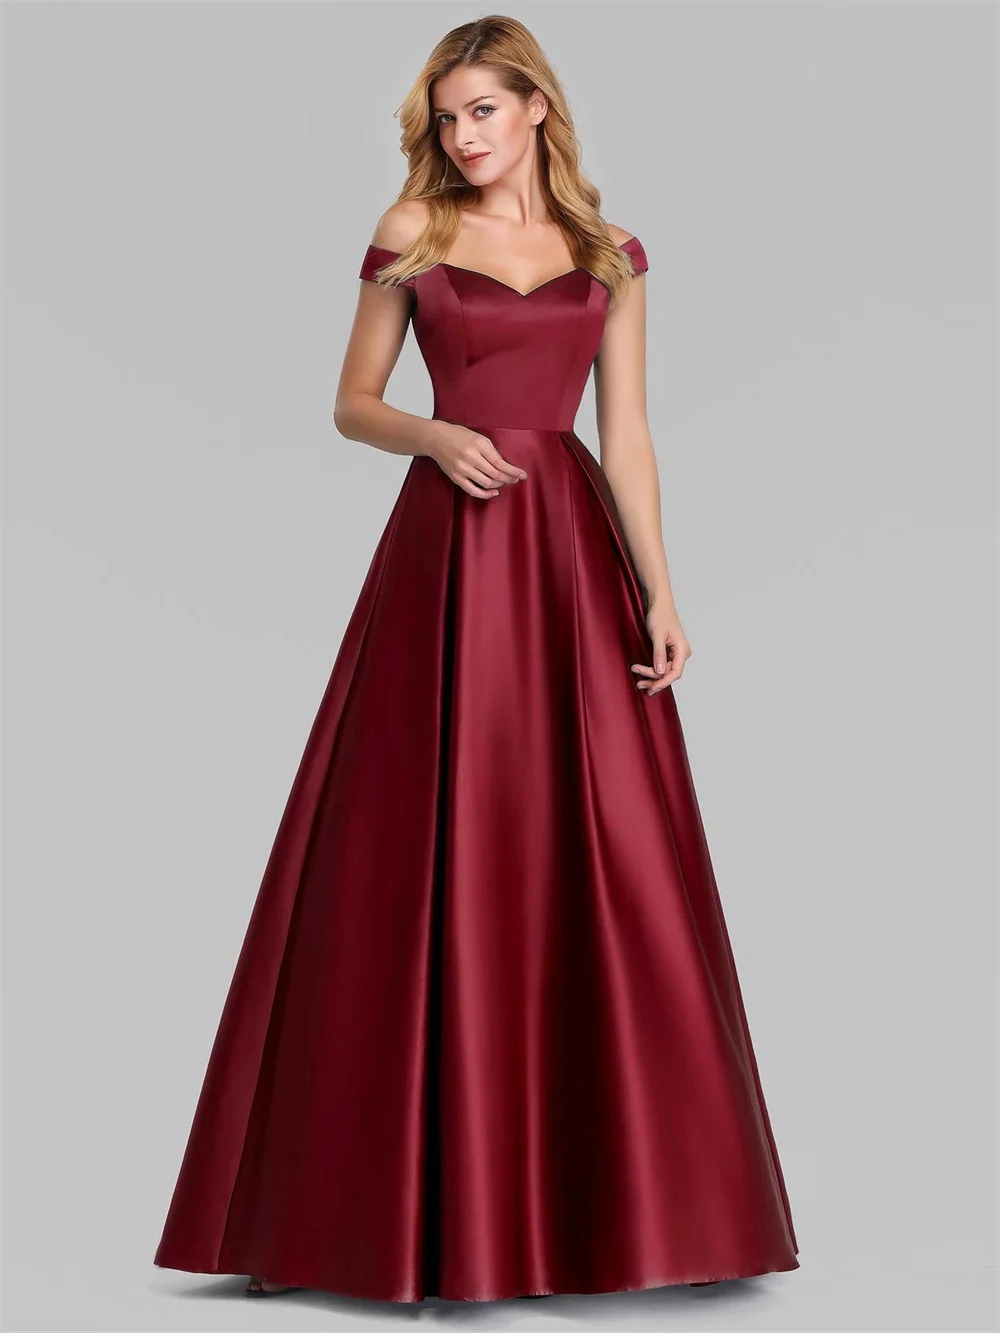 Elegant Women Evening Party Dress 2023 New in Sexy V-neck High Waist Maxi Gowns Ladies Boutique Prom Quinceanera Dresses women elegant long party dresses v neck appliques evening dress sleeveless backless sexy robe soiree mermaid dress ladies gowns